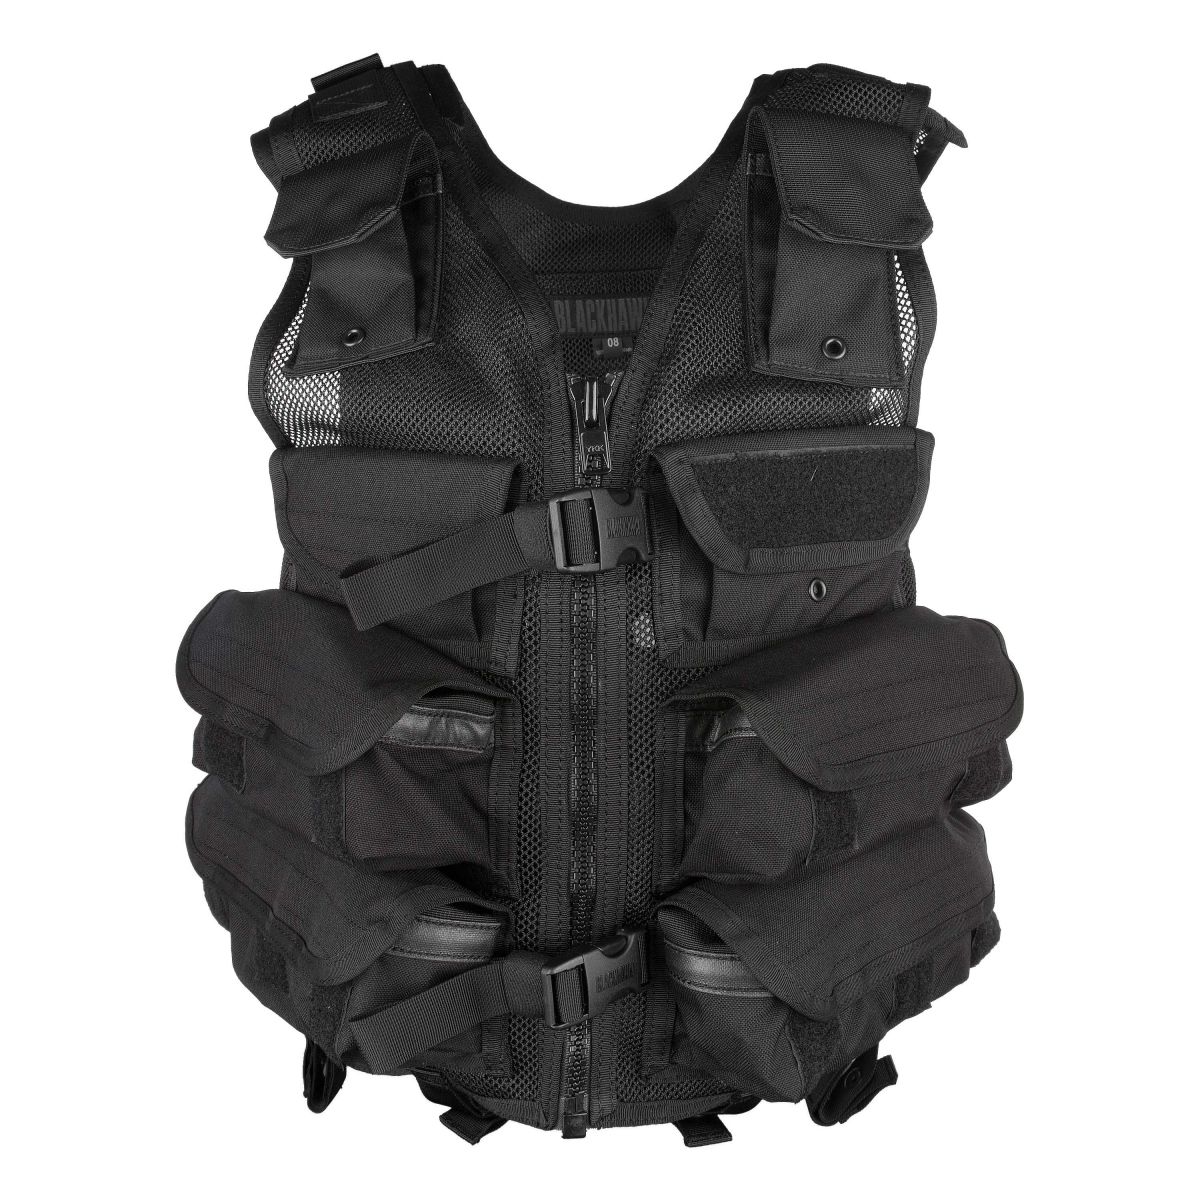 Purchase the Blackhawk Omega Tactical Vest Medic/Utility by ASMC